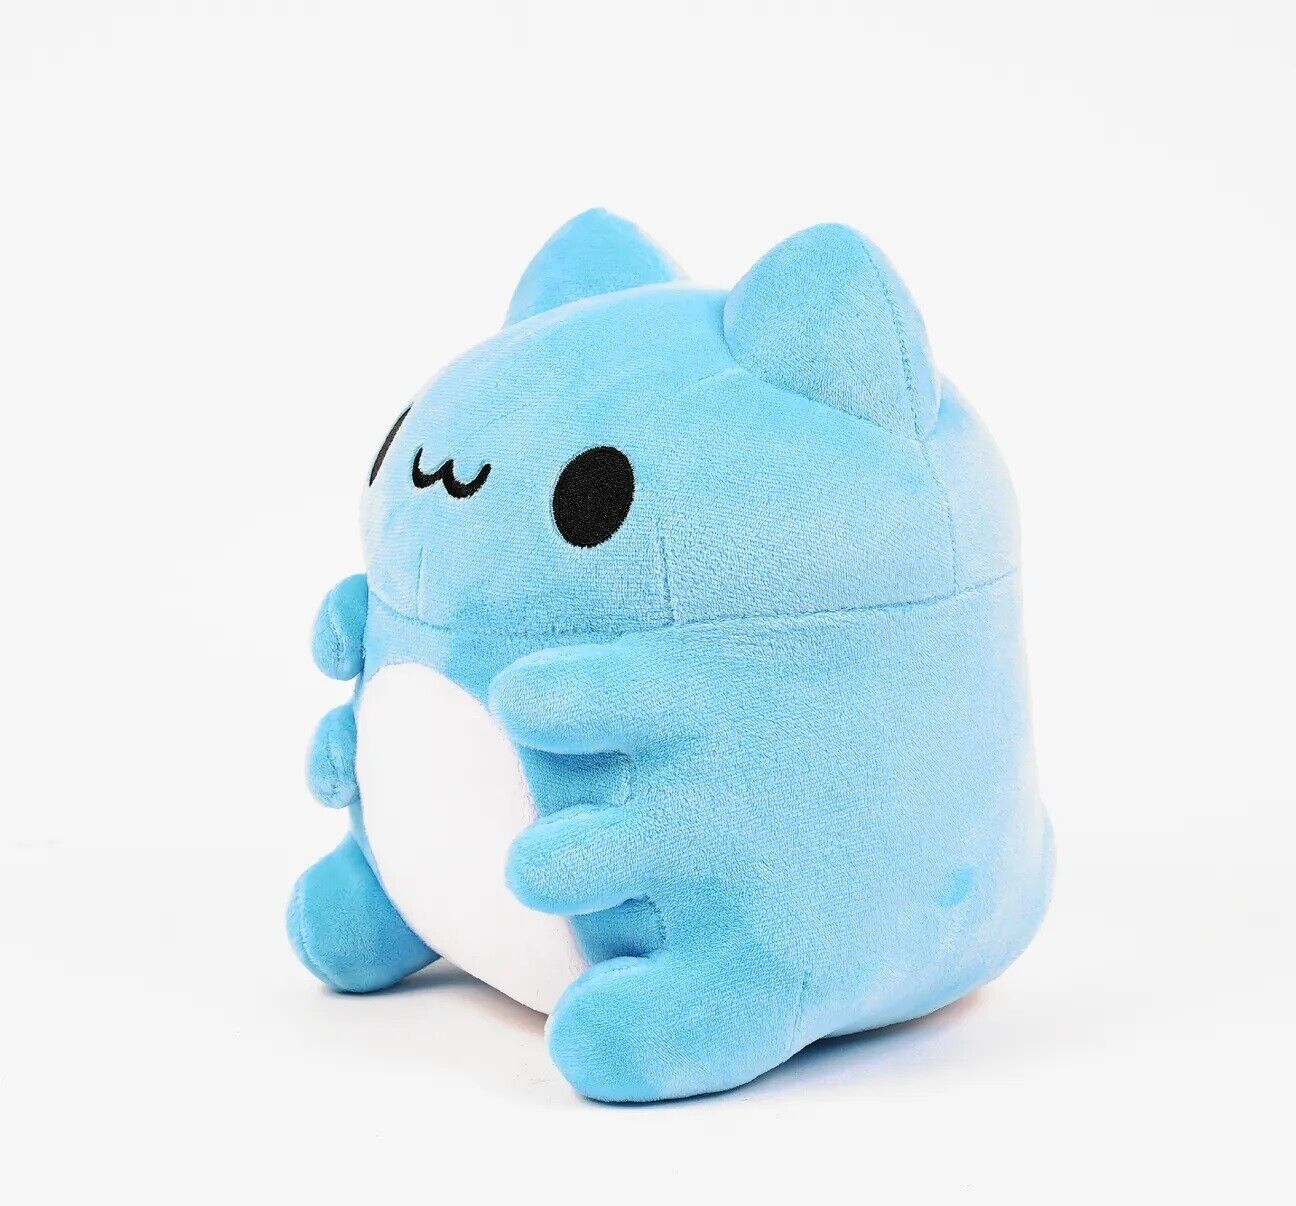 Bugcat Capoo X 7-11 Seated Capoo Plush 25cm in Height (official Merch)